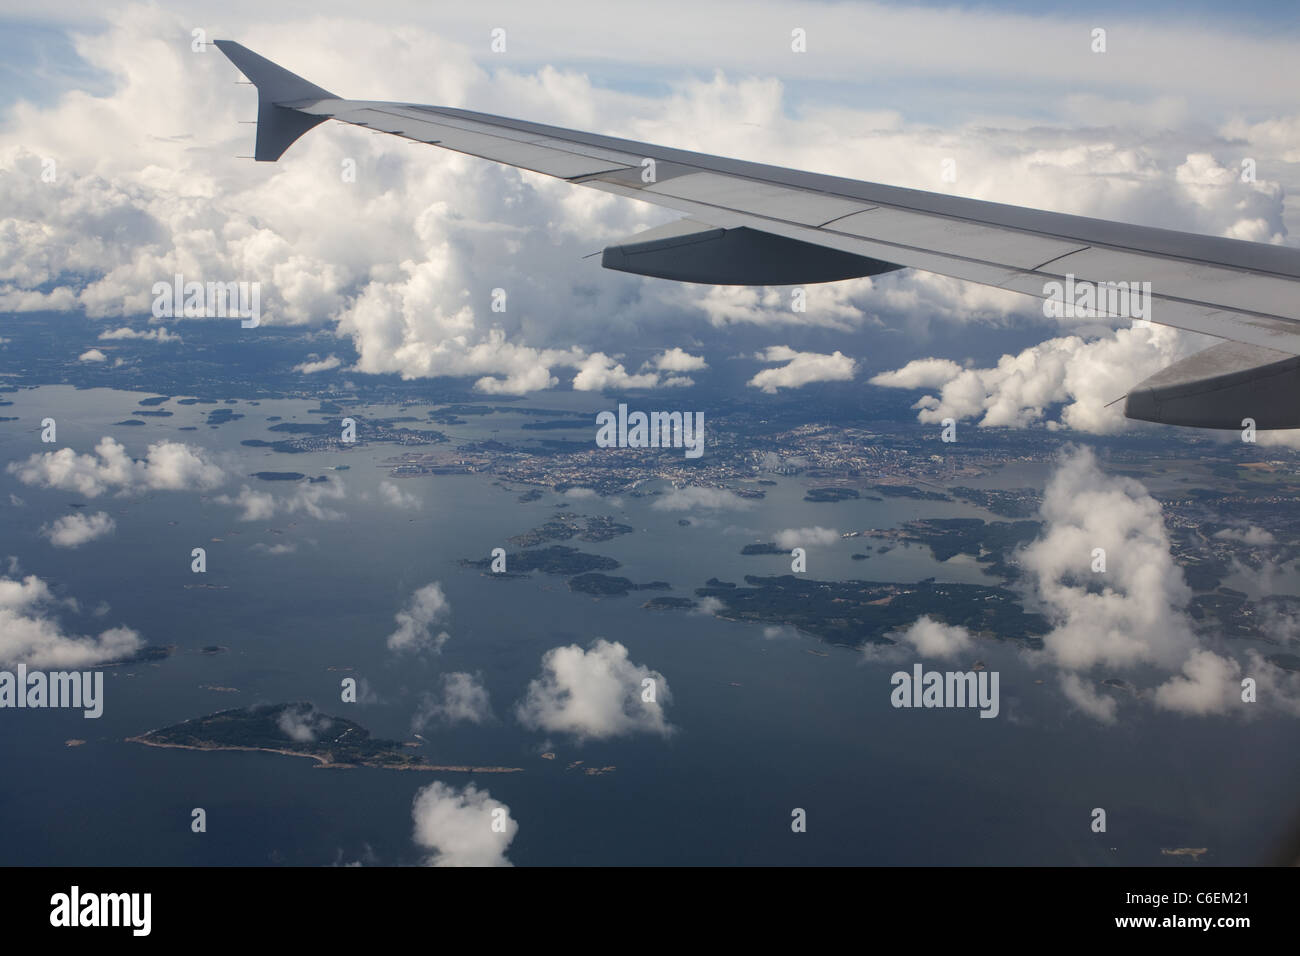 The view from the airplane window. Åland Islands Stock Photo